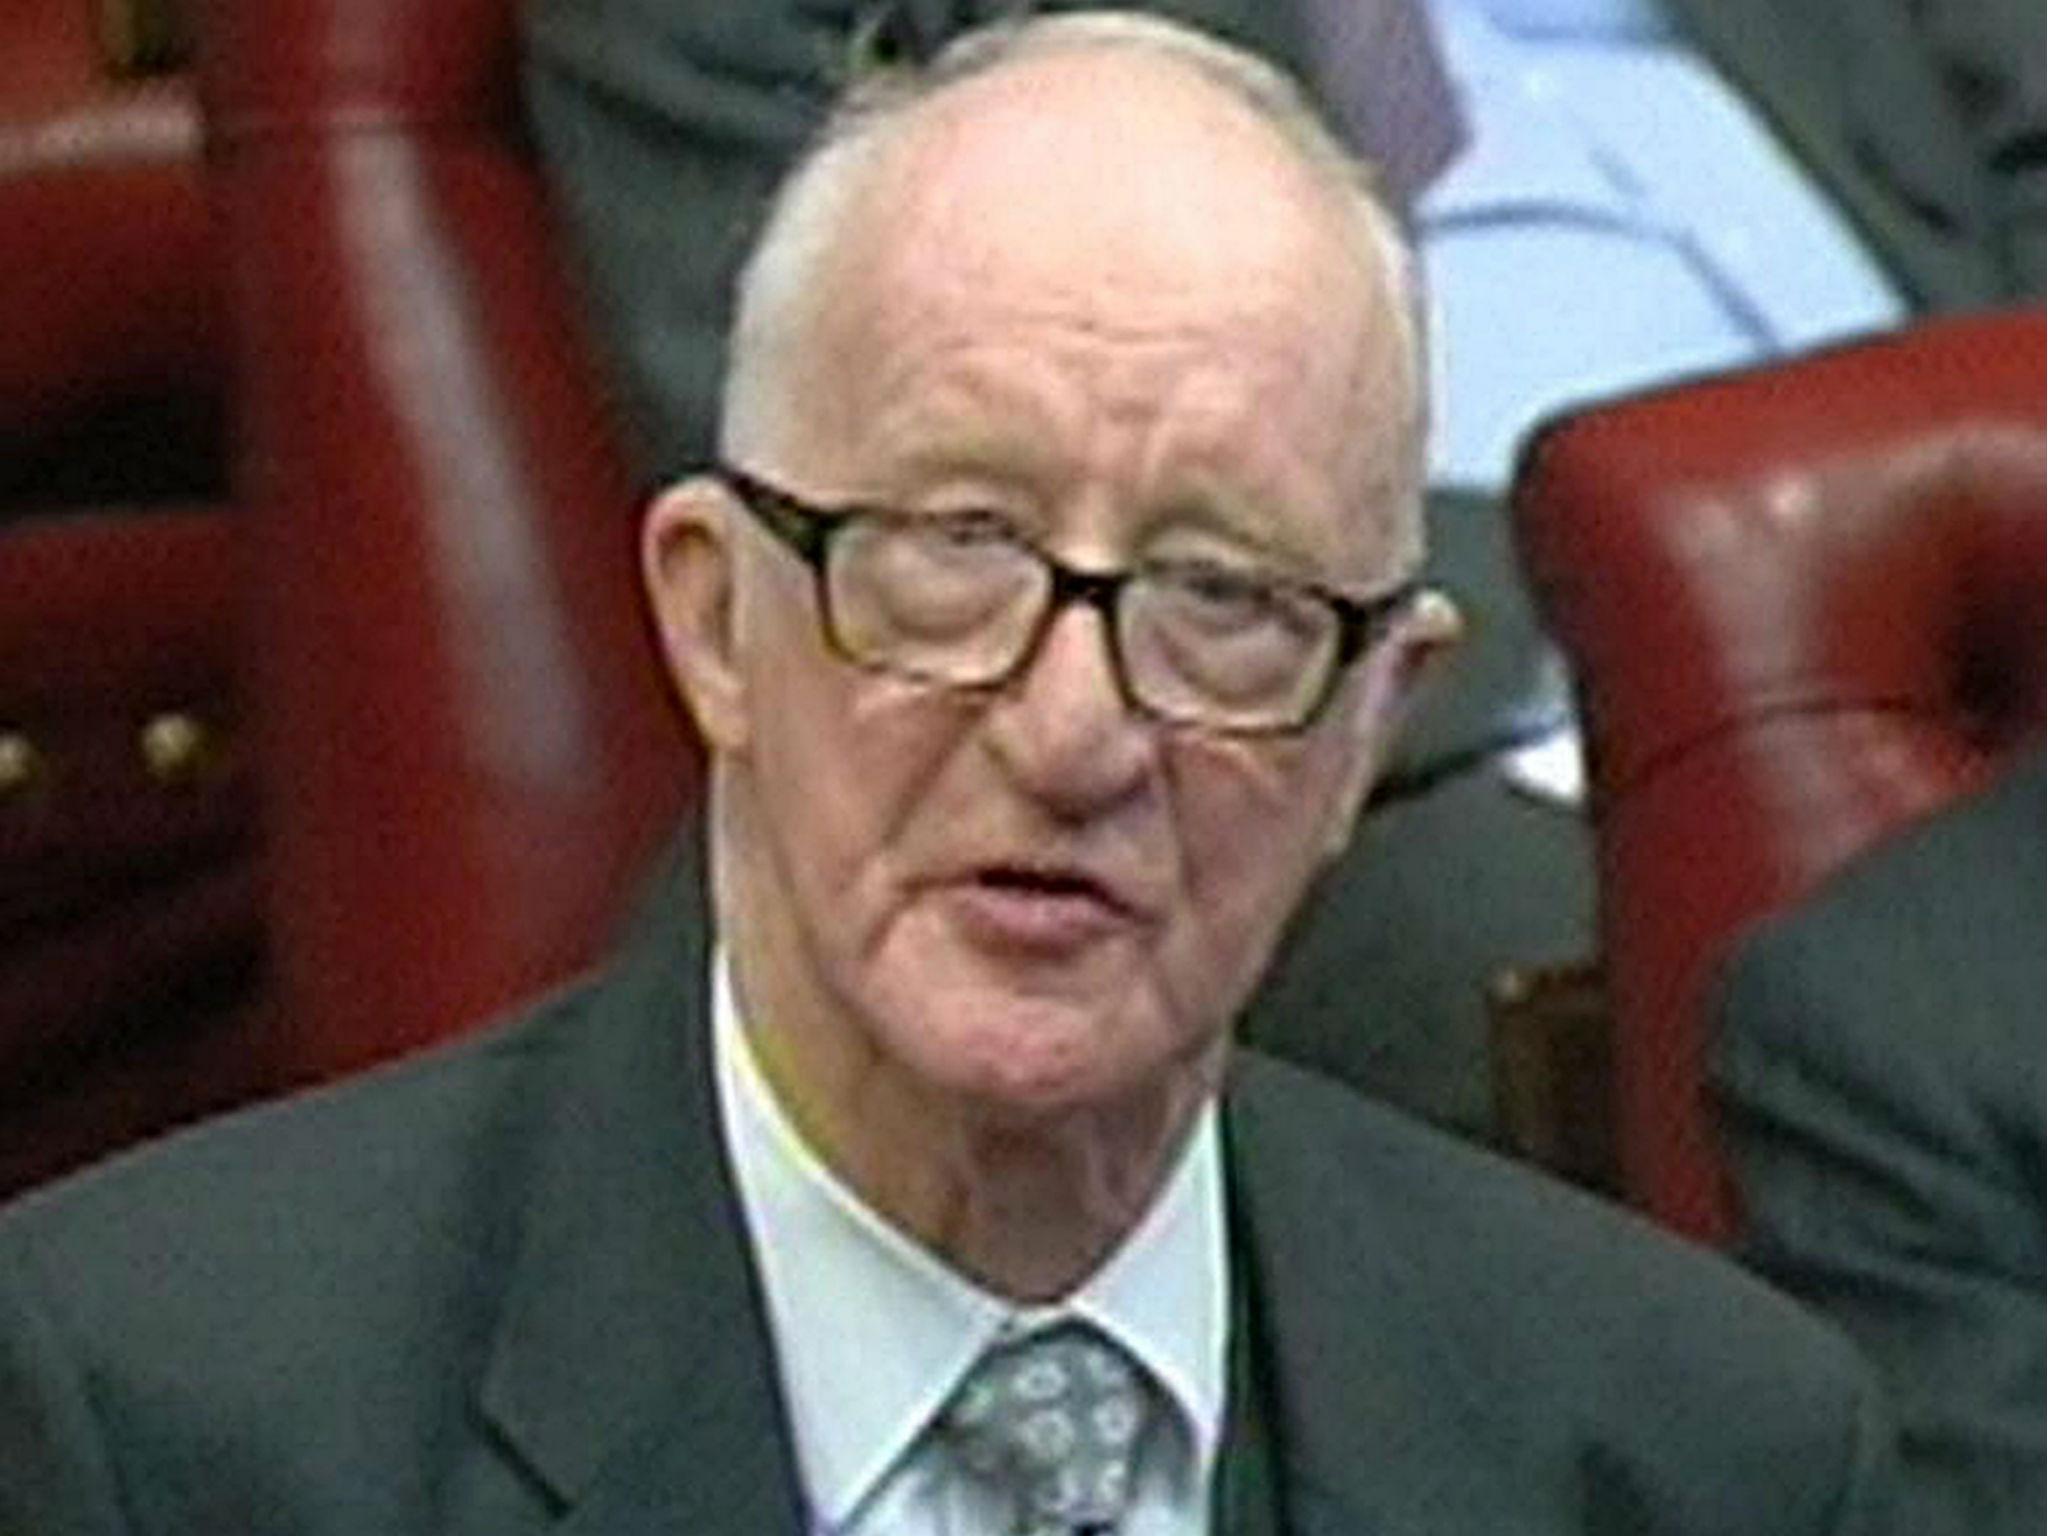 Lord Taylor died nine days after the collision in November 2016